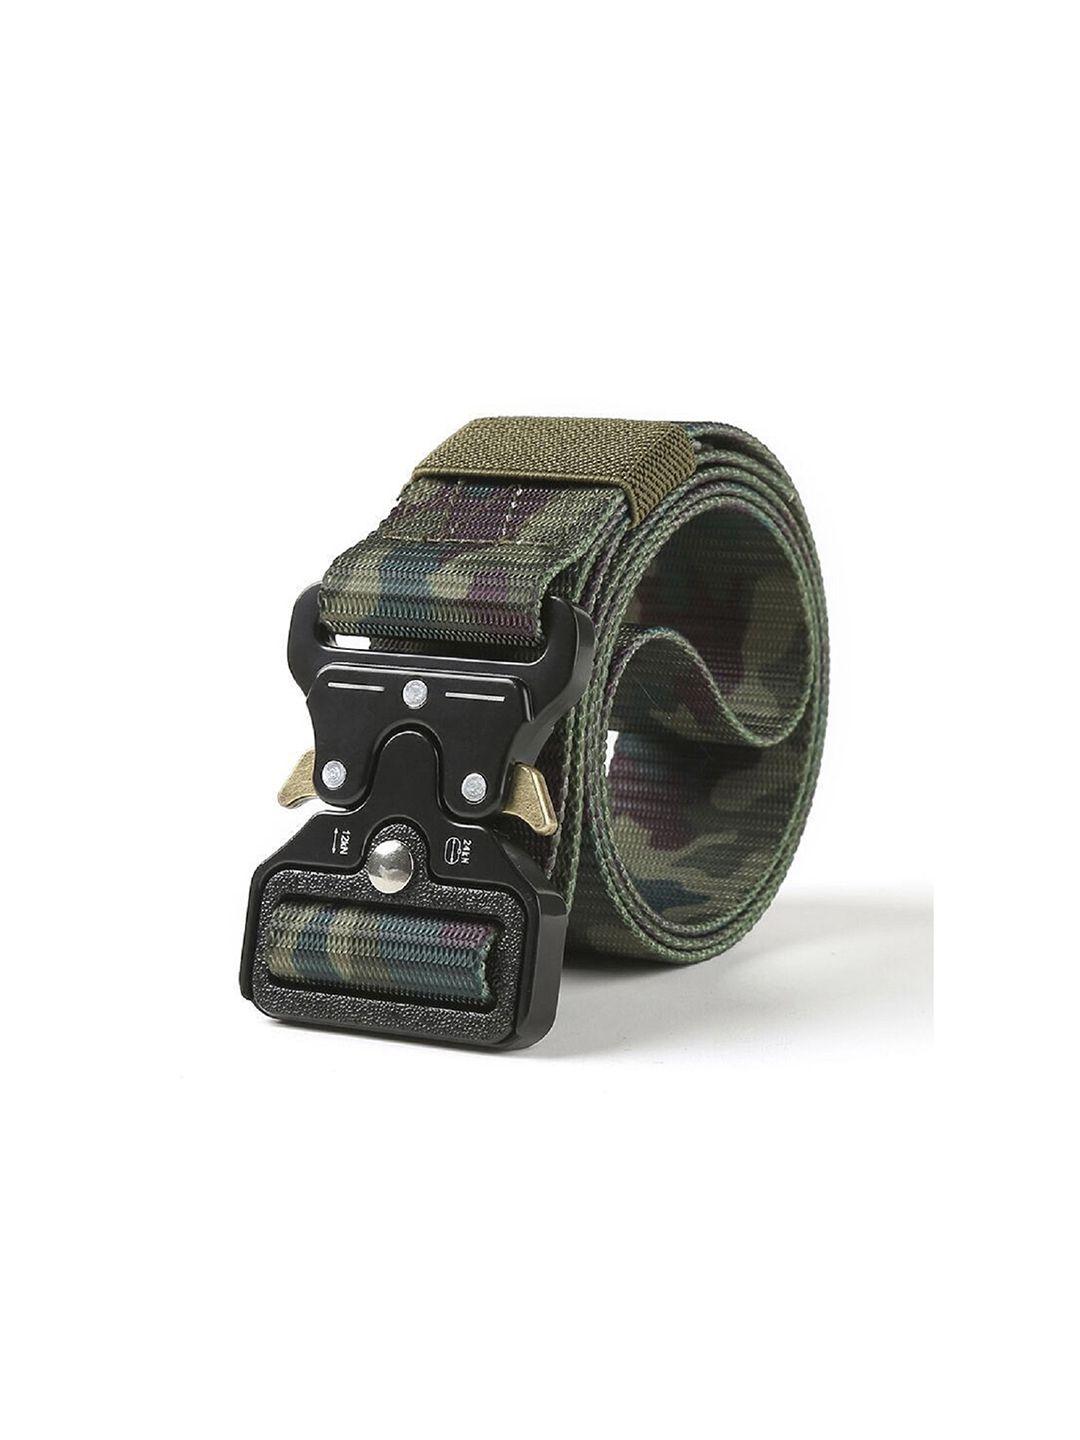 contacts men olive green & beige printed belts